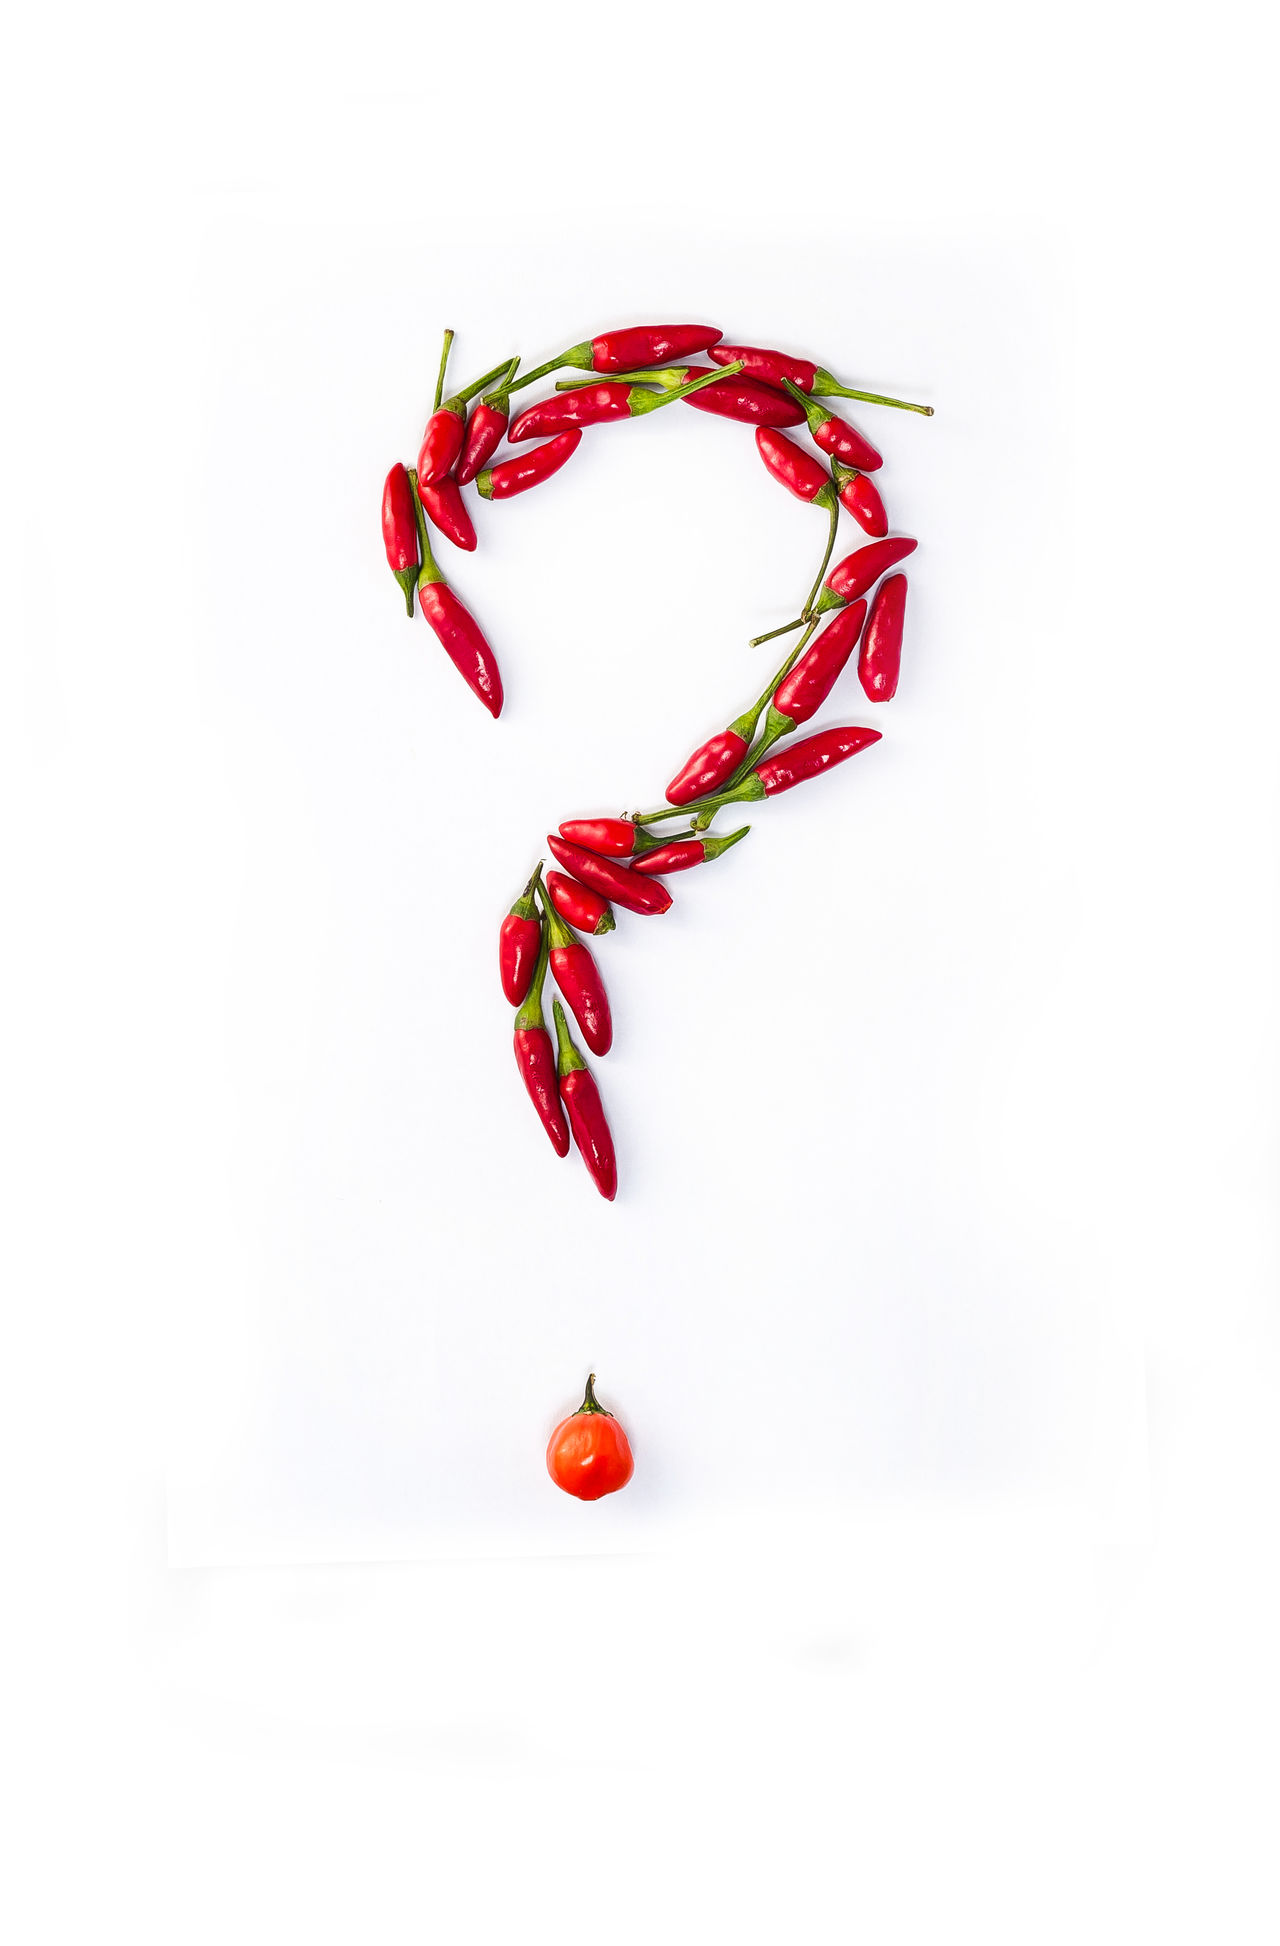 Chili pepper, questions point,